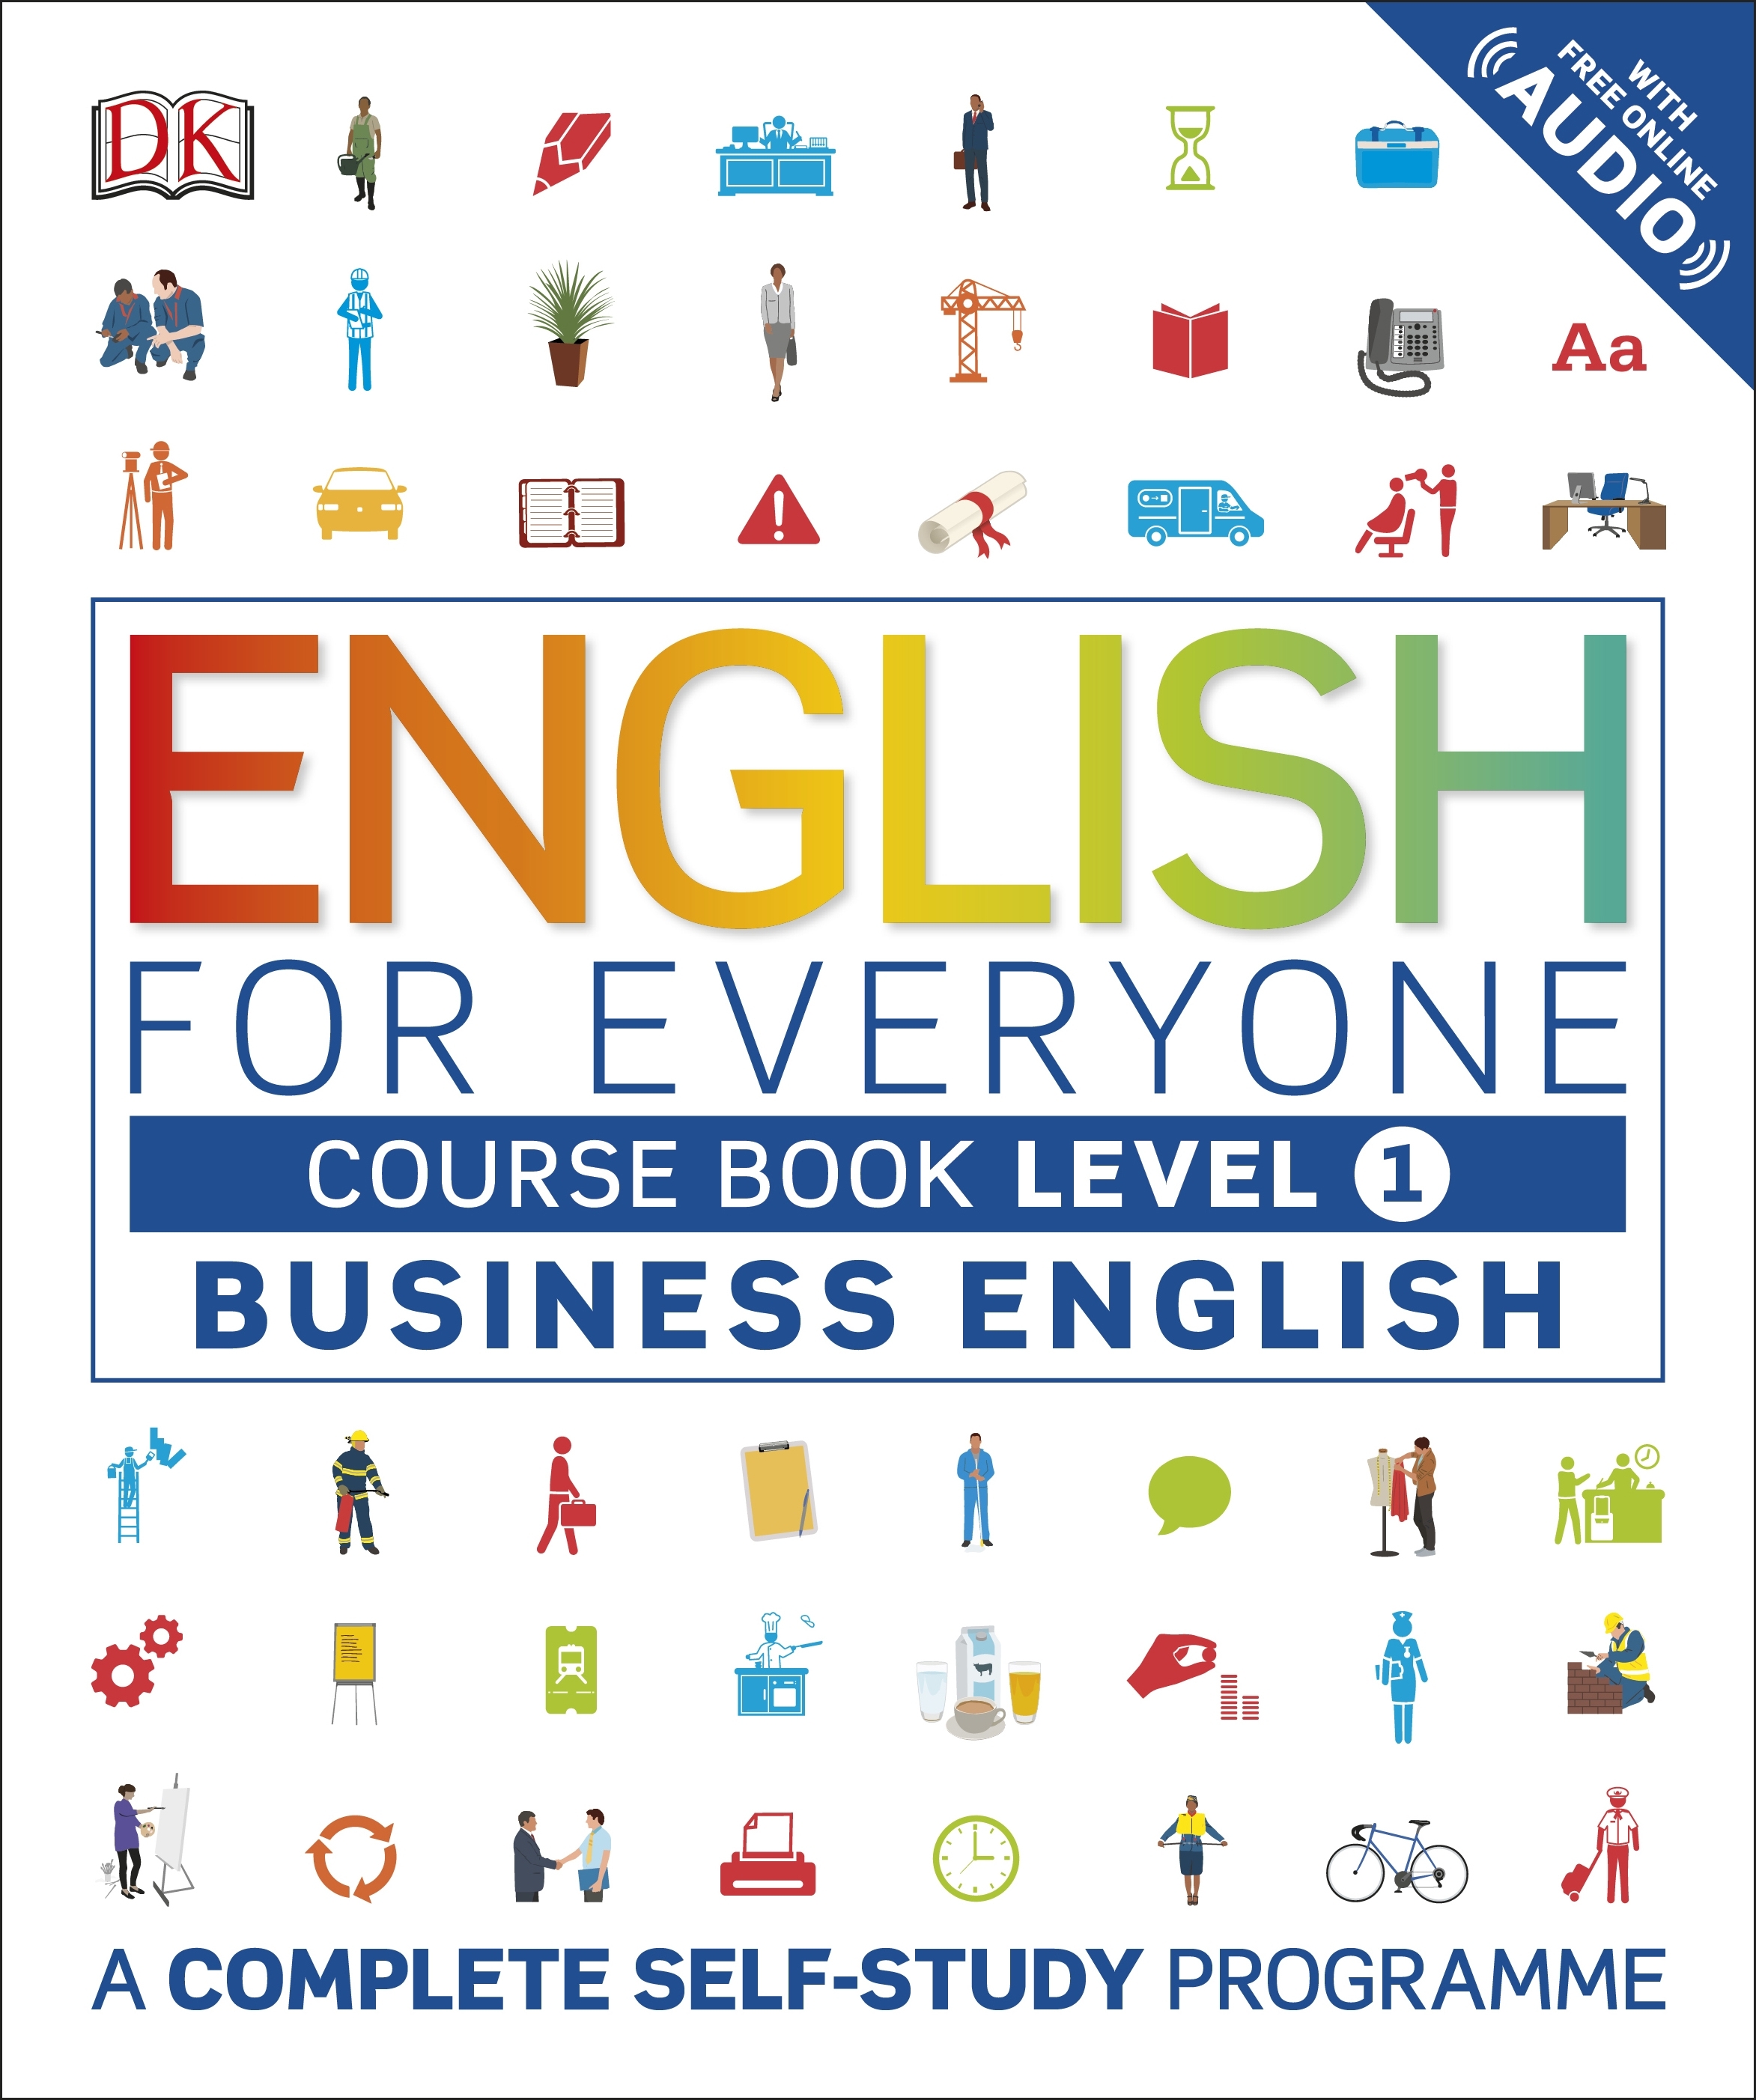 English For Everyone Business Course Book By Dk Penguin - 